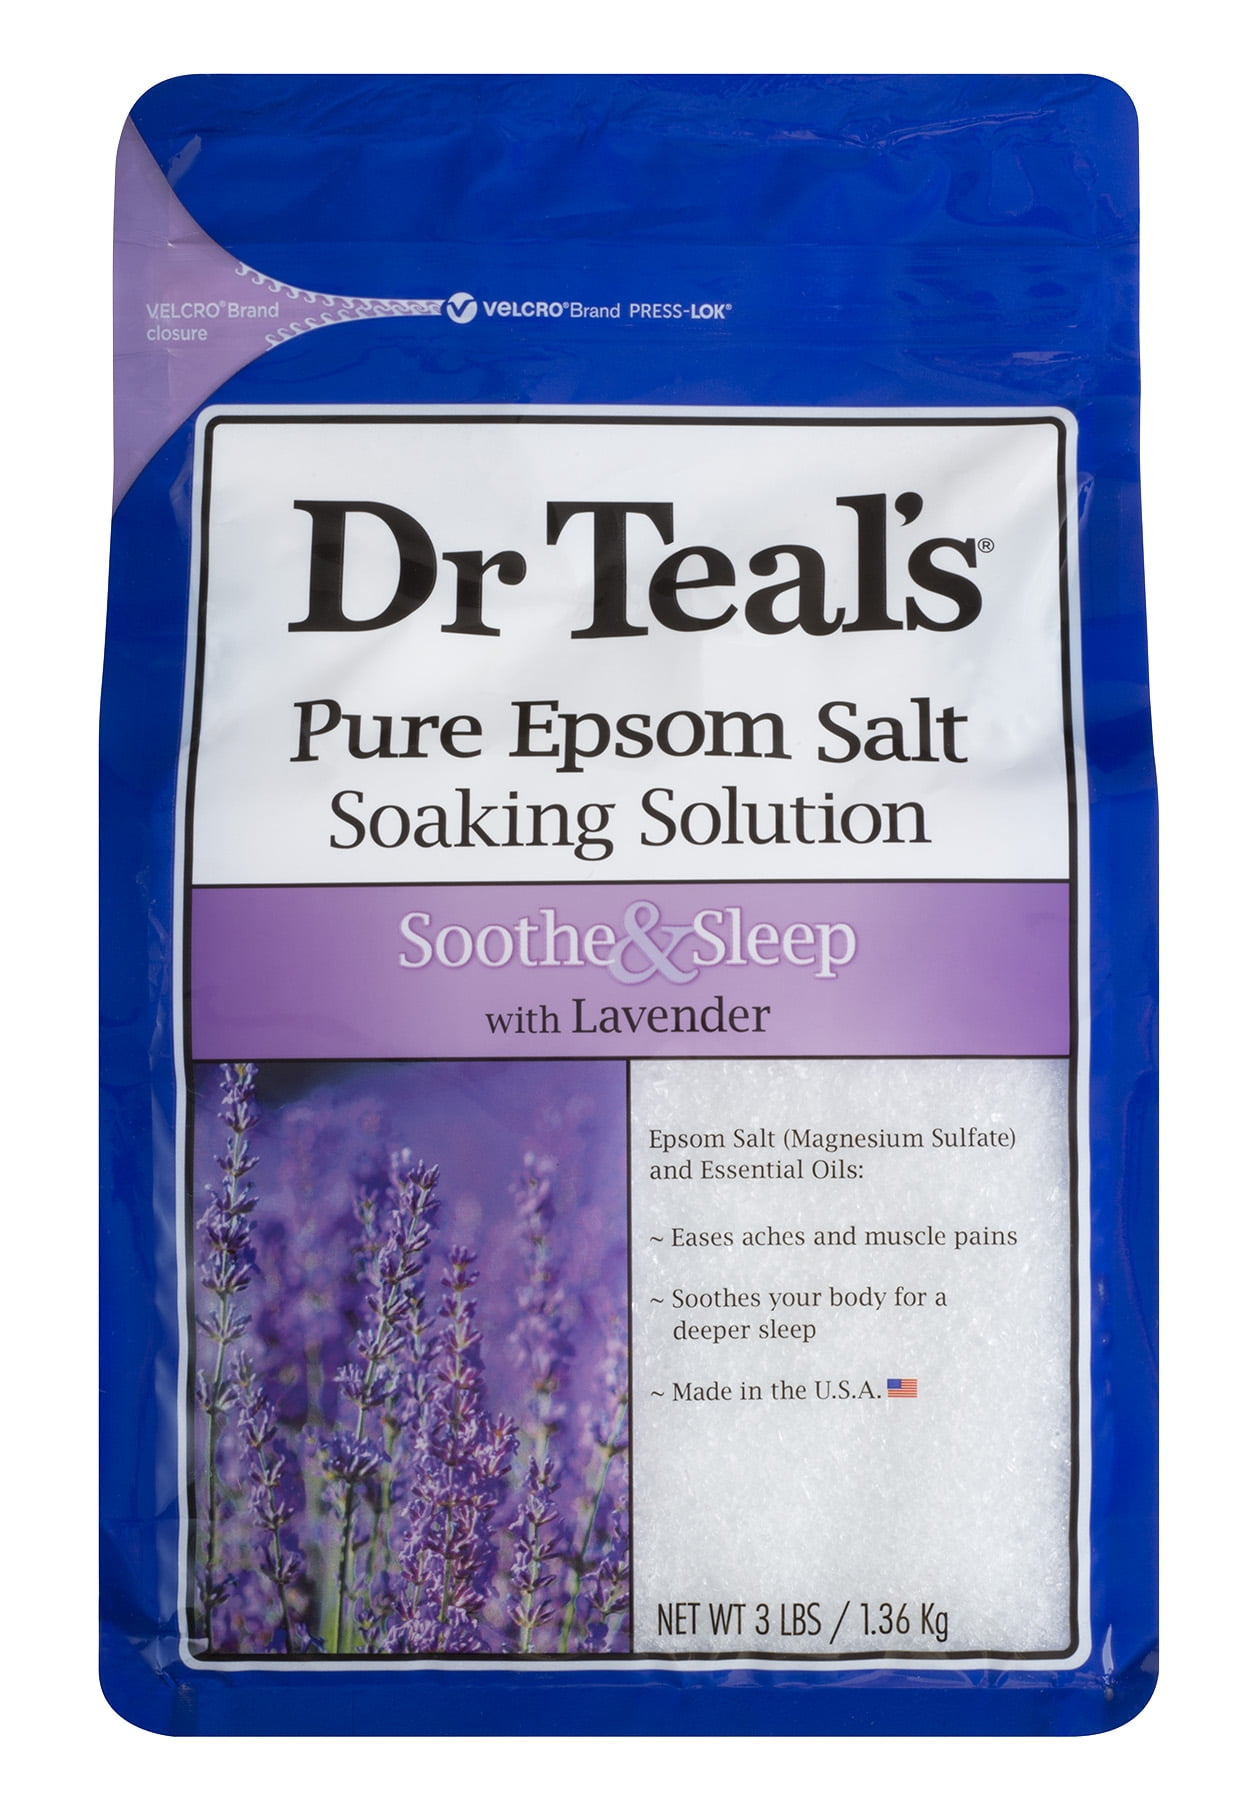 Dr Teals Pure Epsom Salt Soaking Solution Soothe And Sleep With